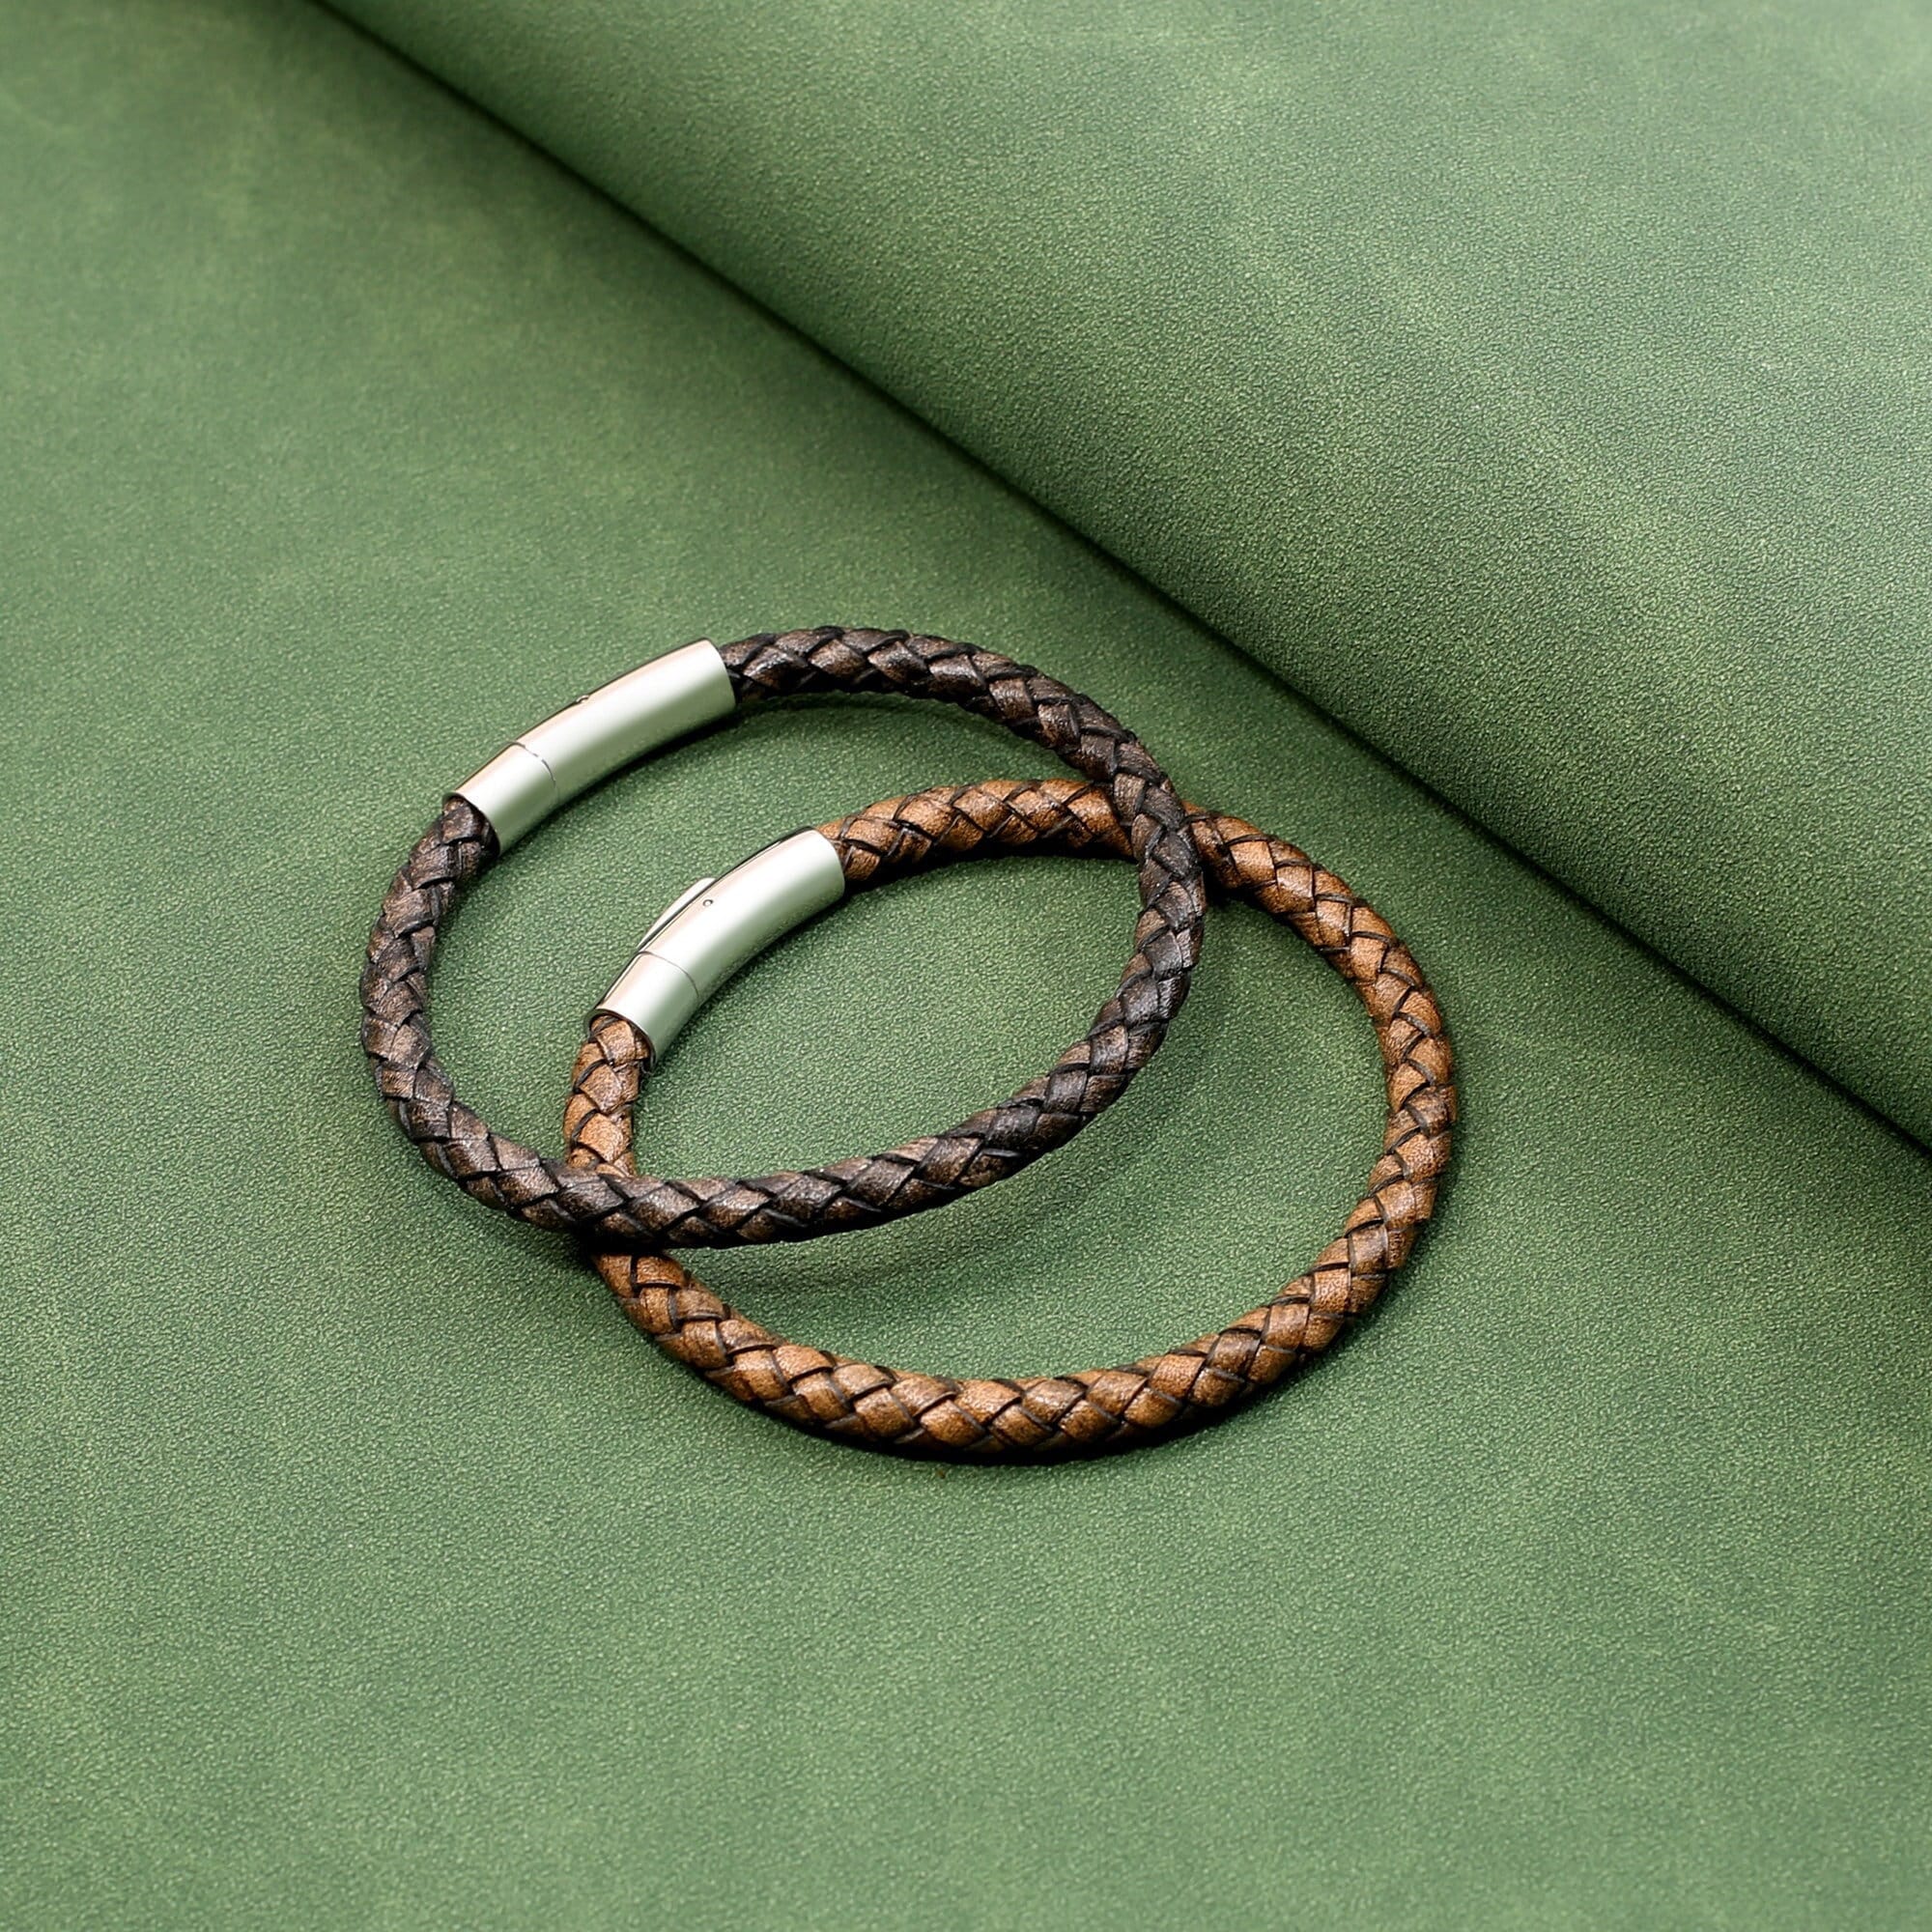 Replacement Braided Leather Cord Bracelet Repair 